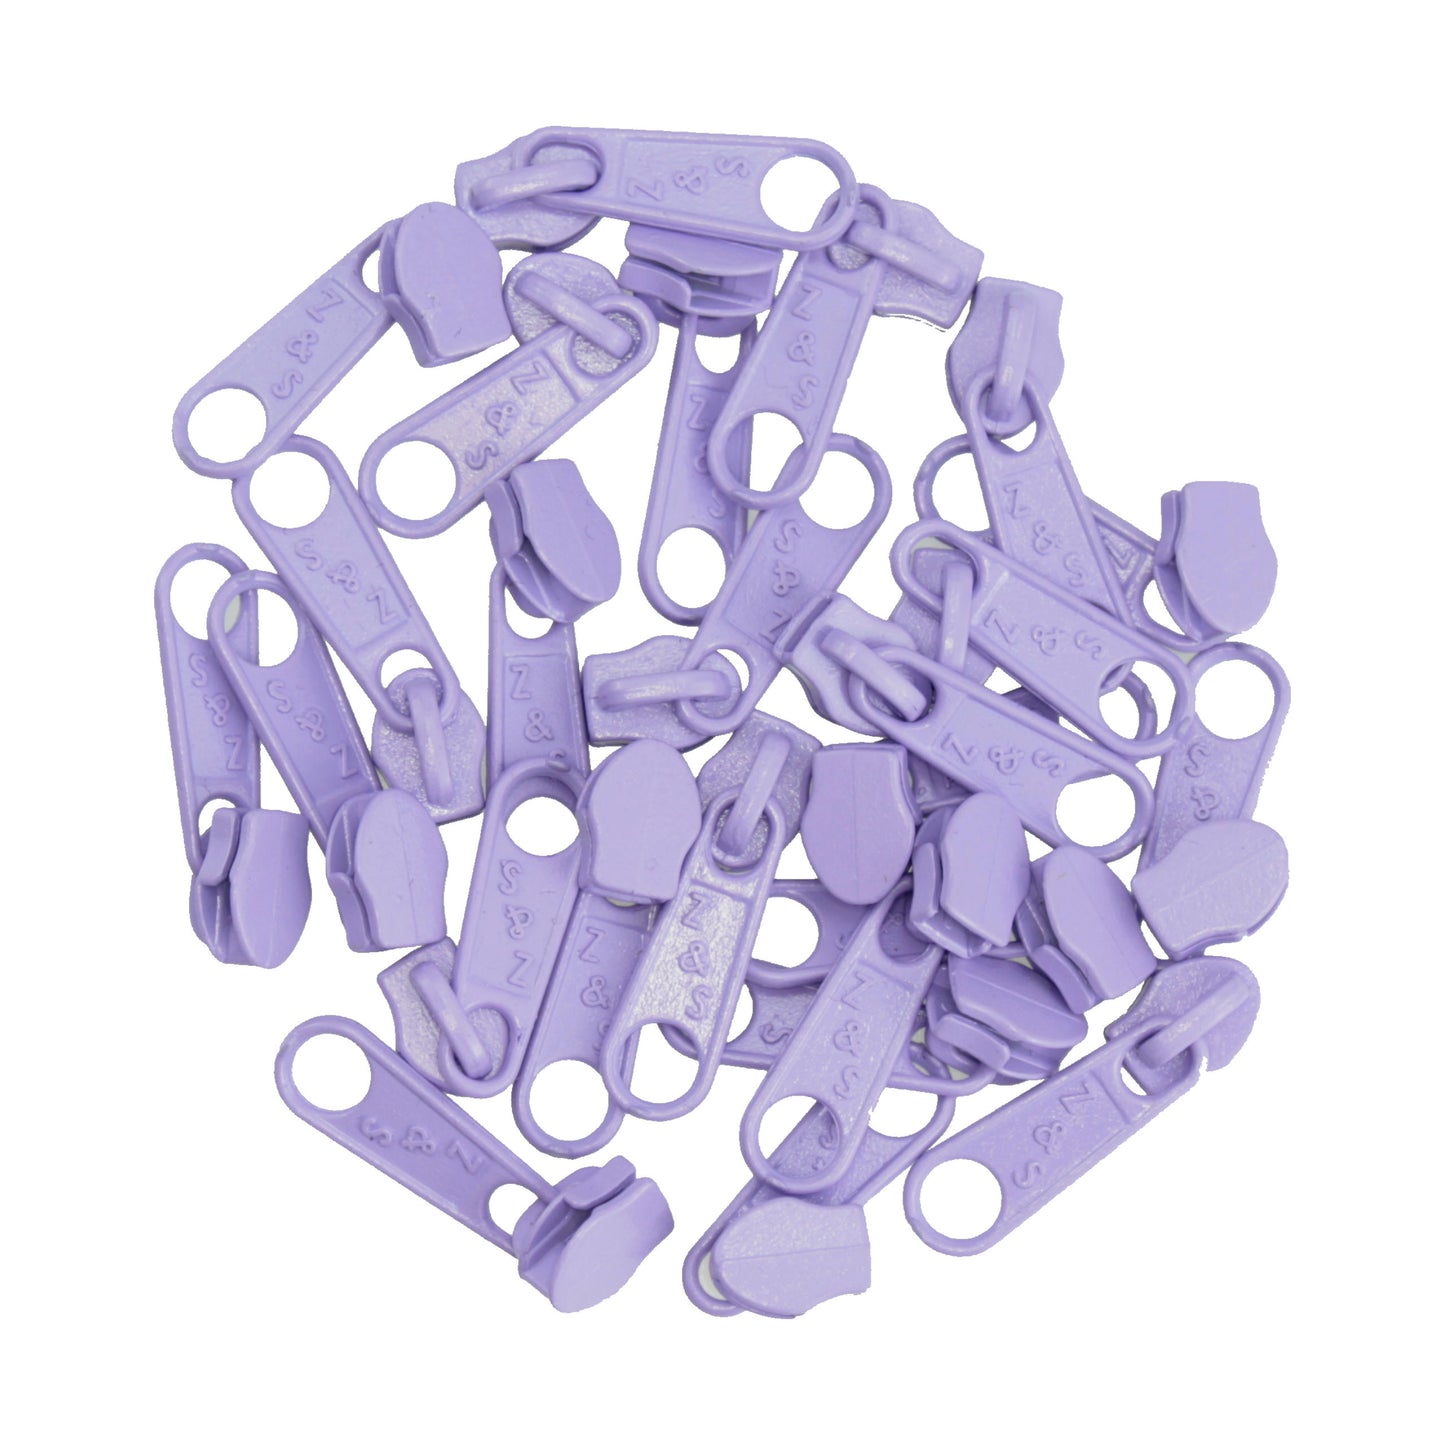 ZIPP AND SLIDE - 25 slider, Lilac - Nickel free - Suitable for our 3 mm endless zipper ZN30